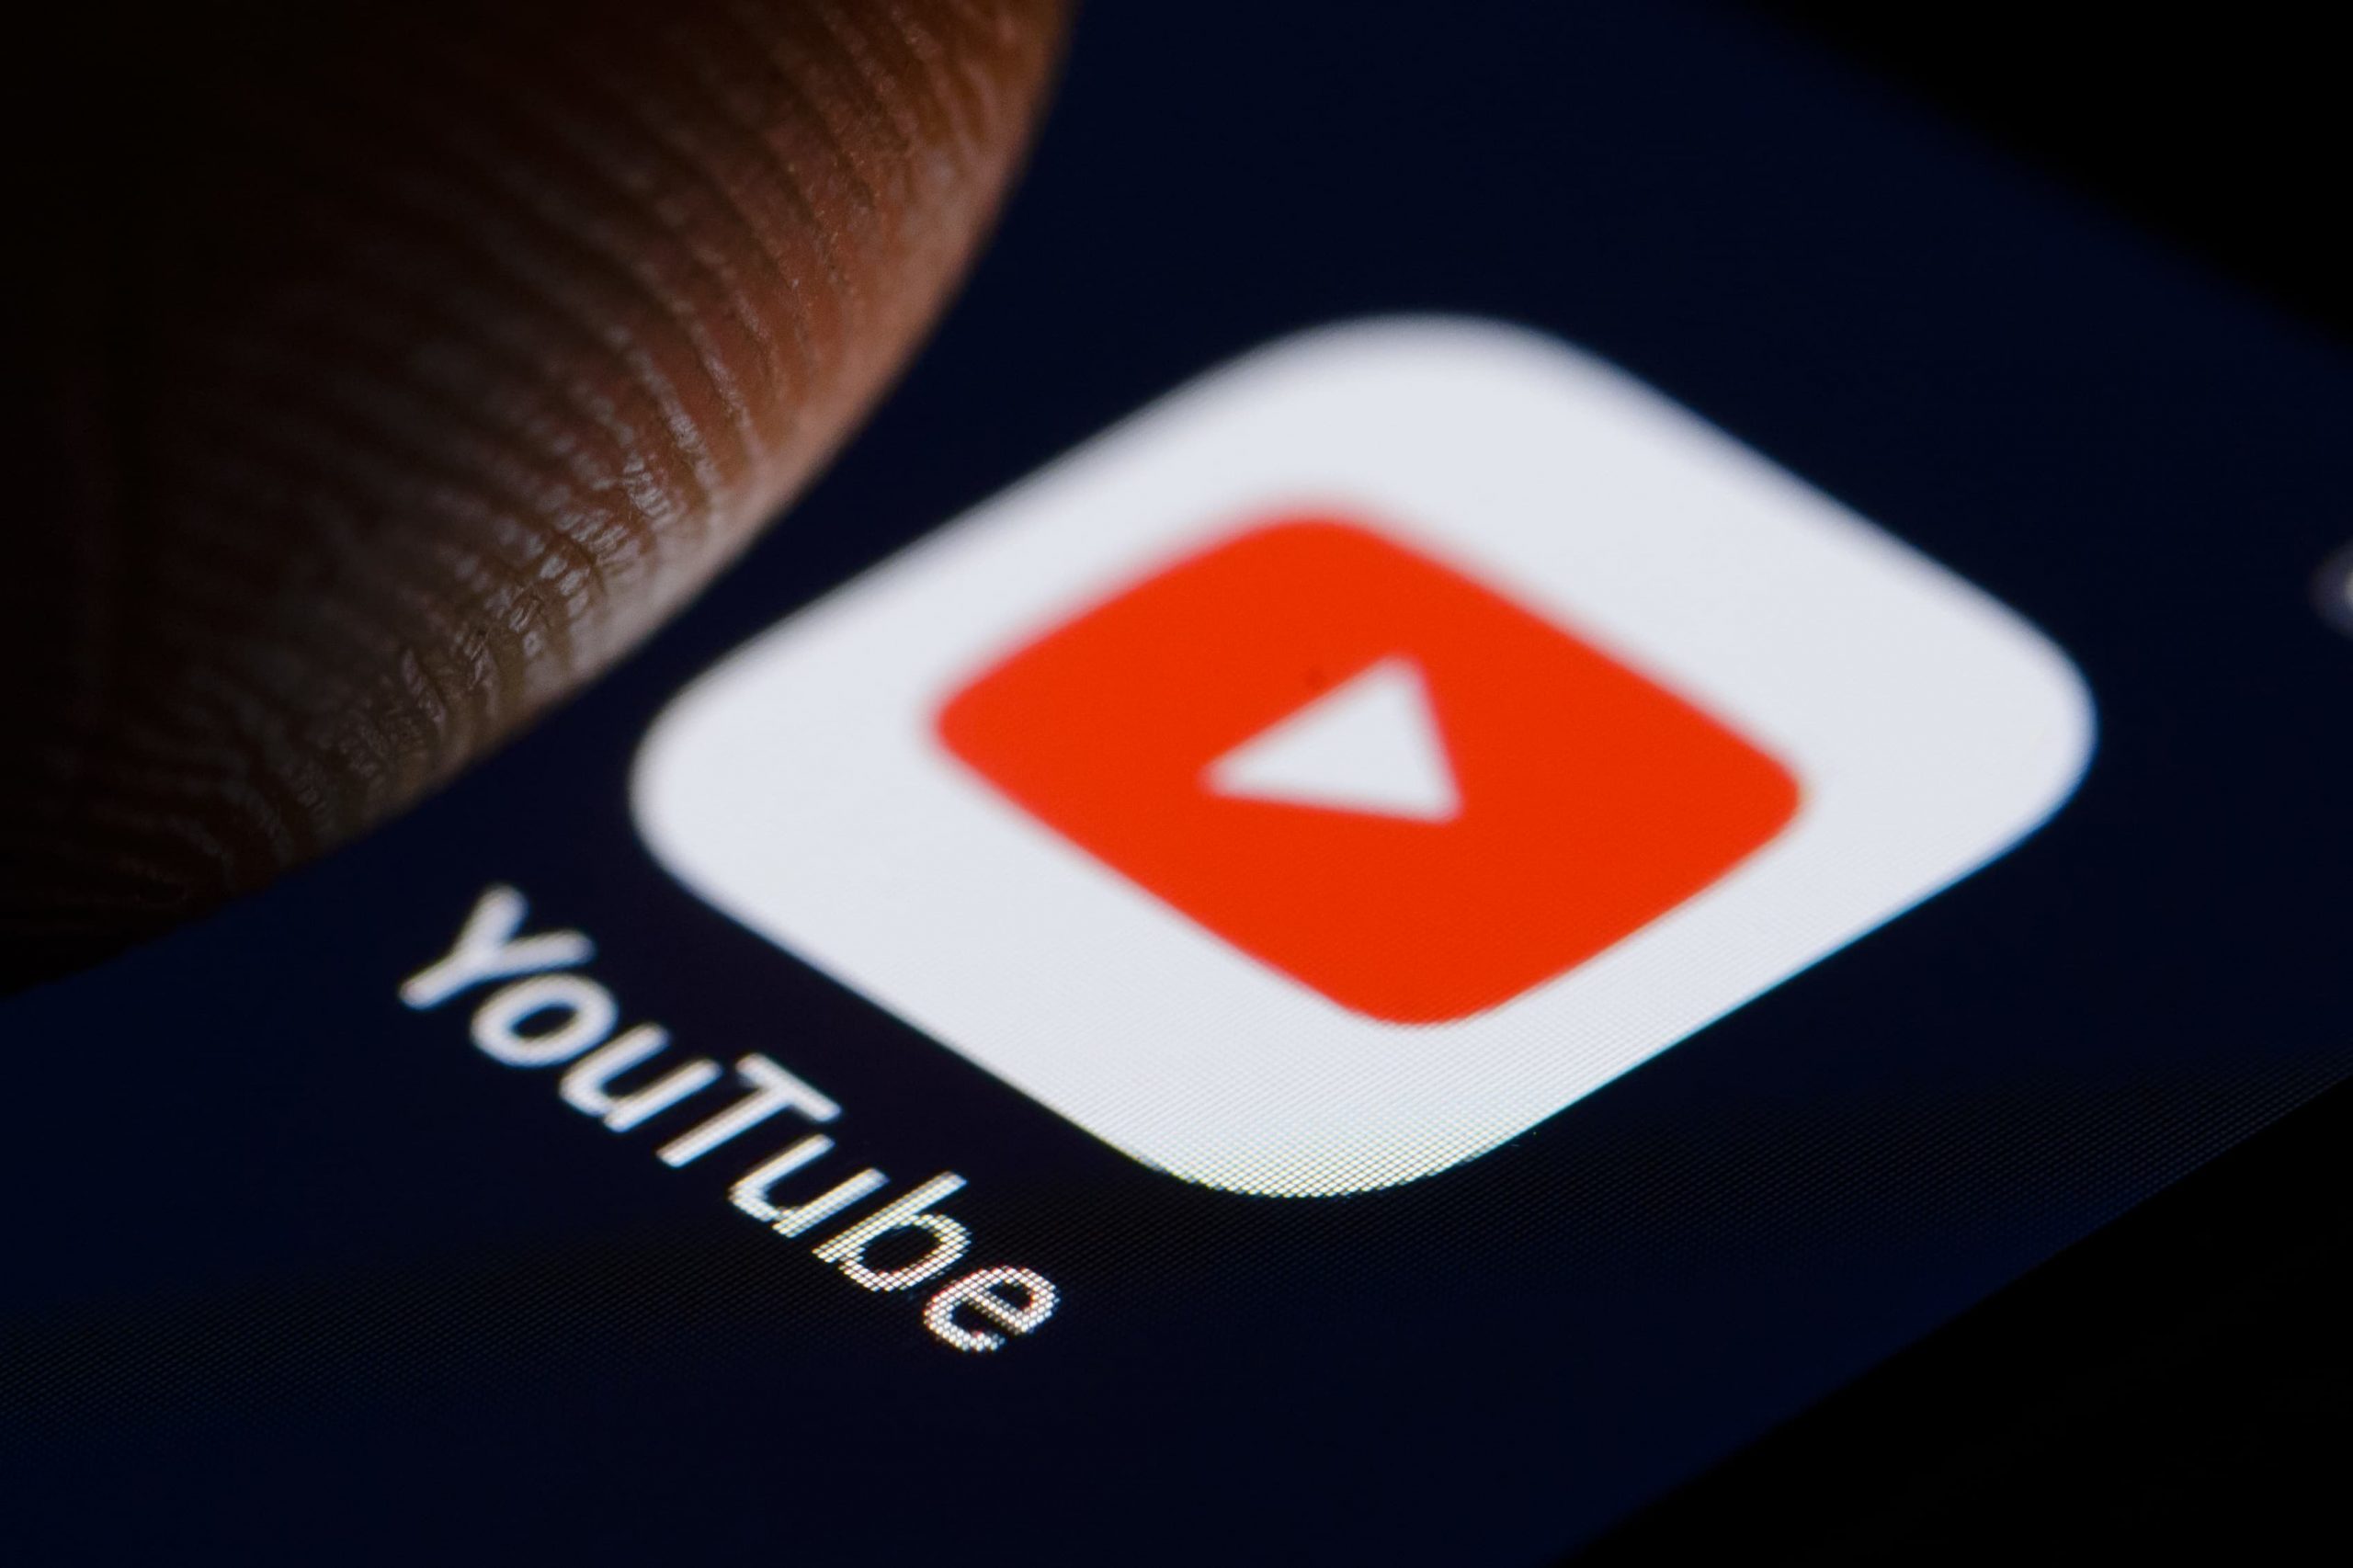 More than a month after the election, YouTube decides to crack down on misinformation on results